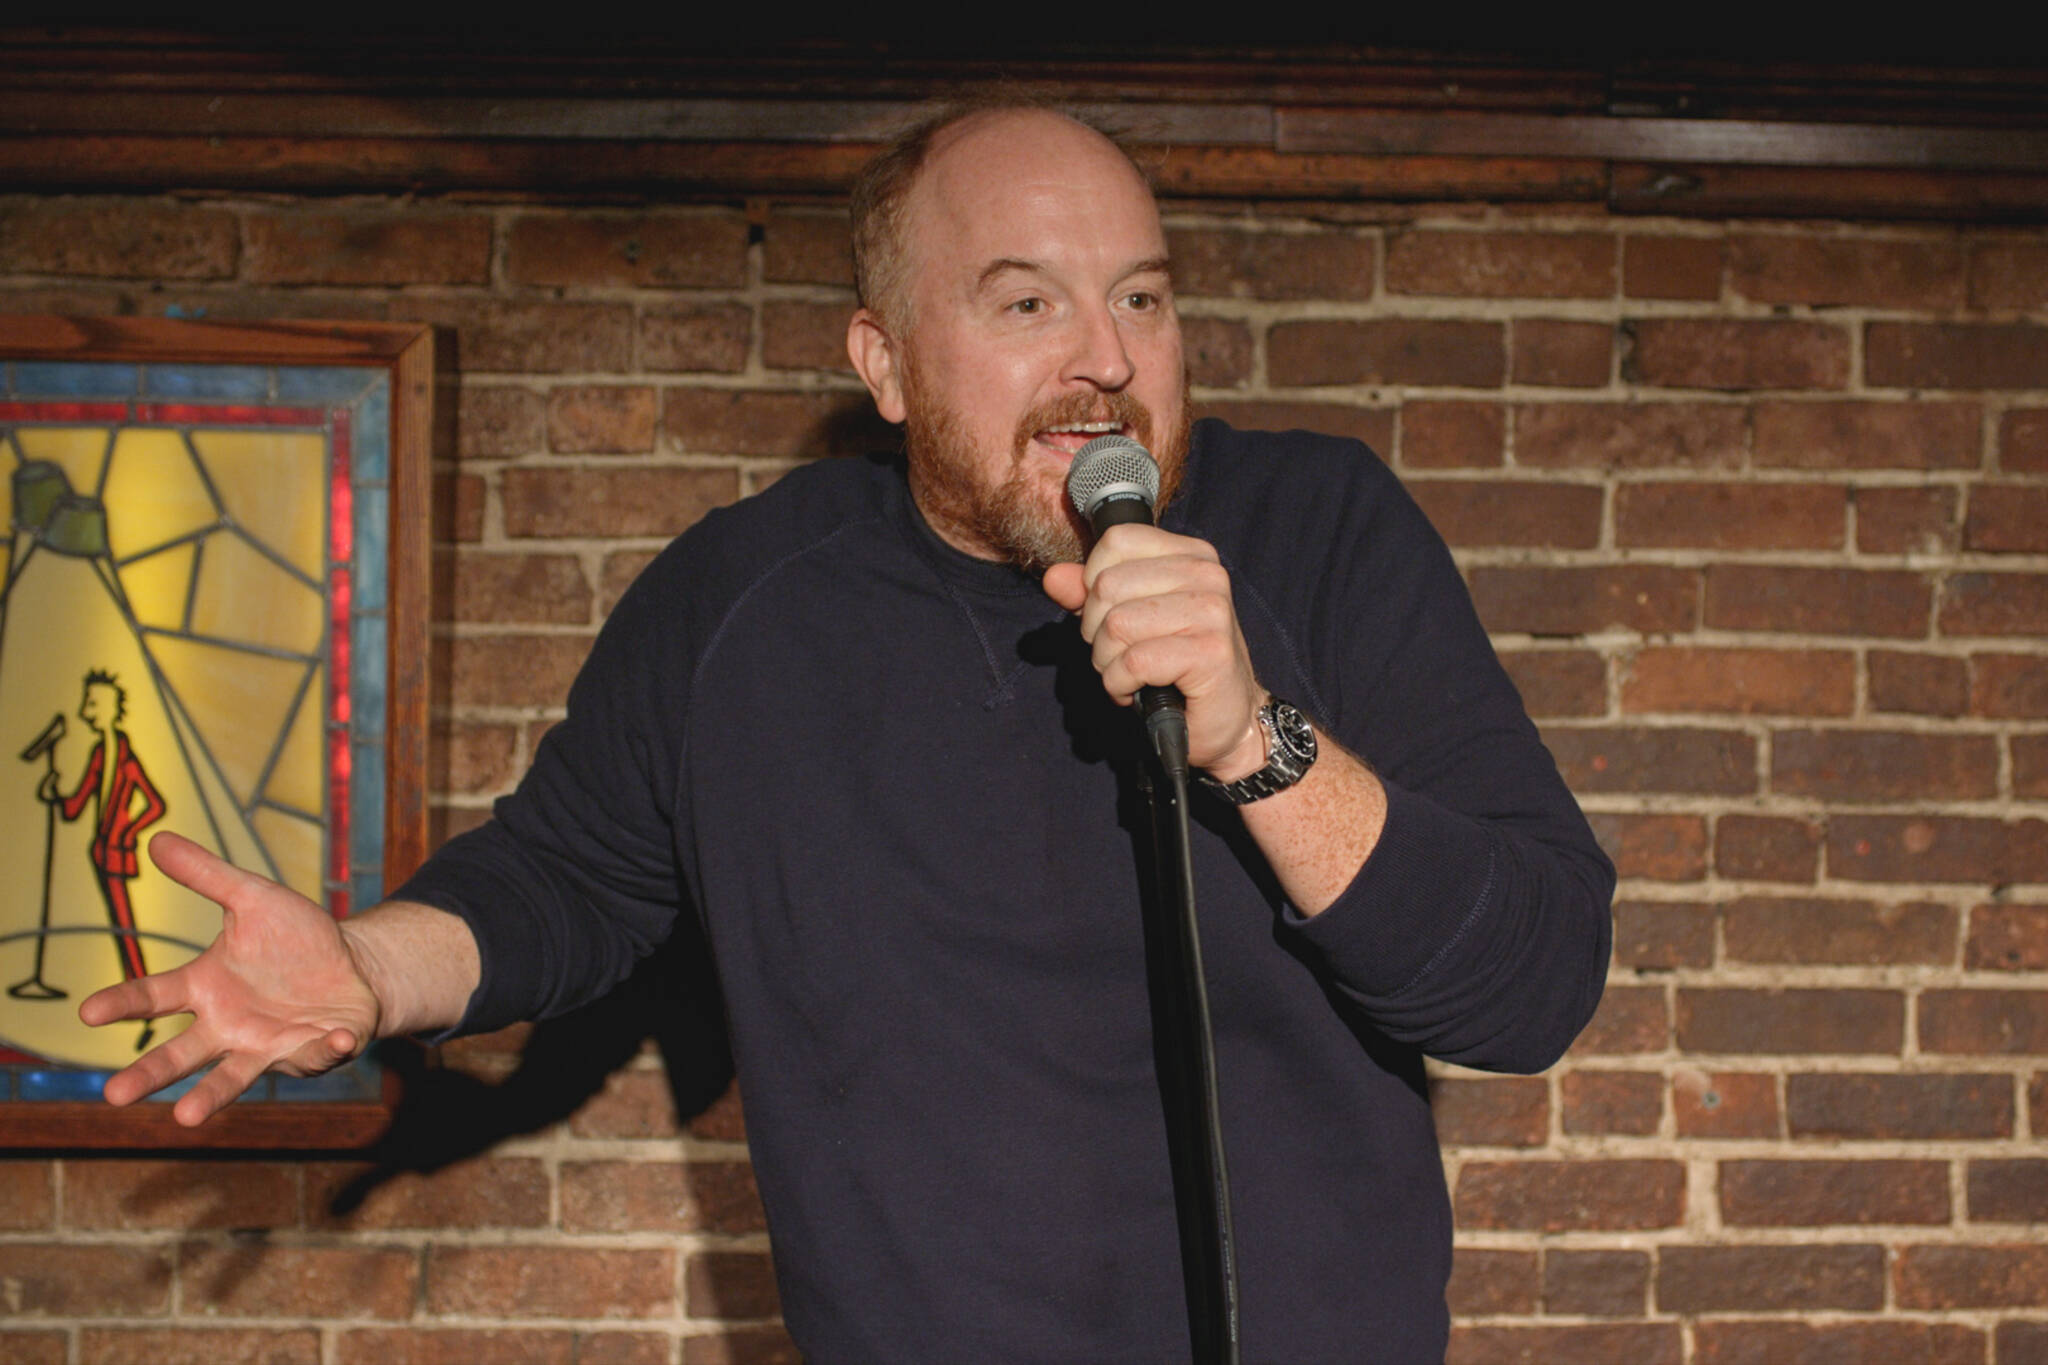 Louis C.K. jokes about masturbation scandal at sold out show in Toronto